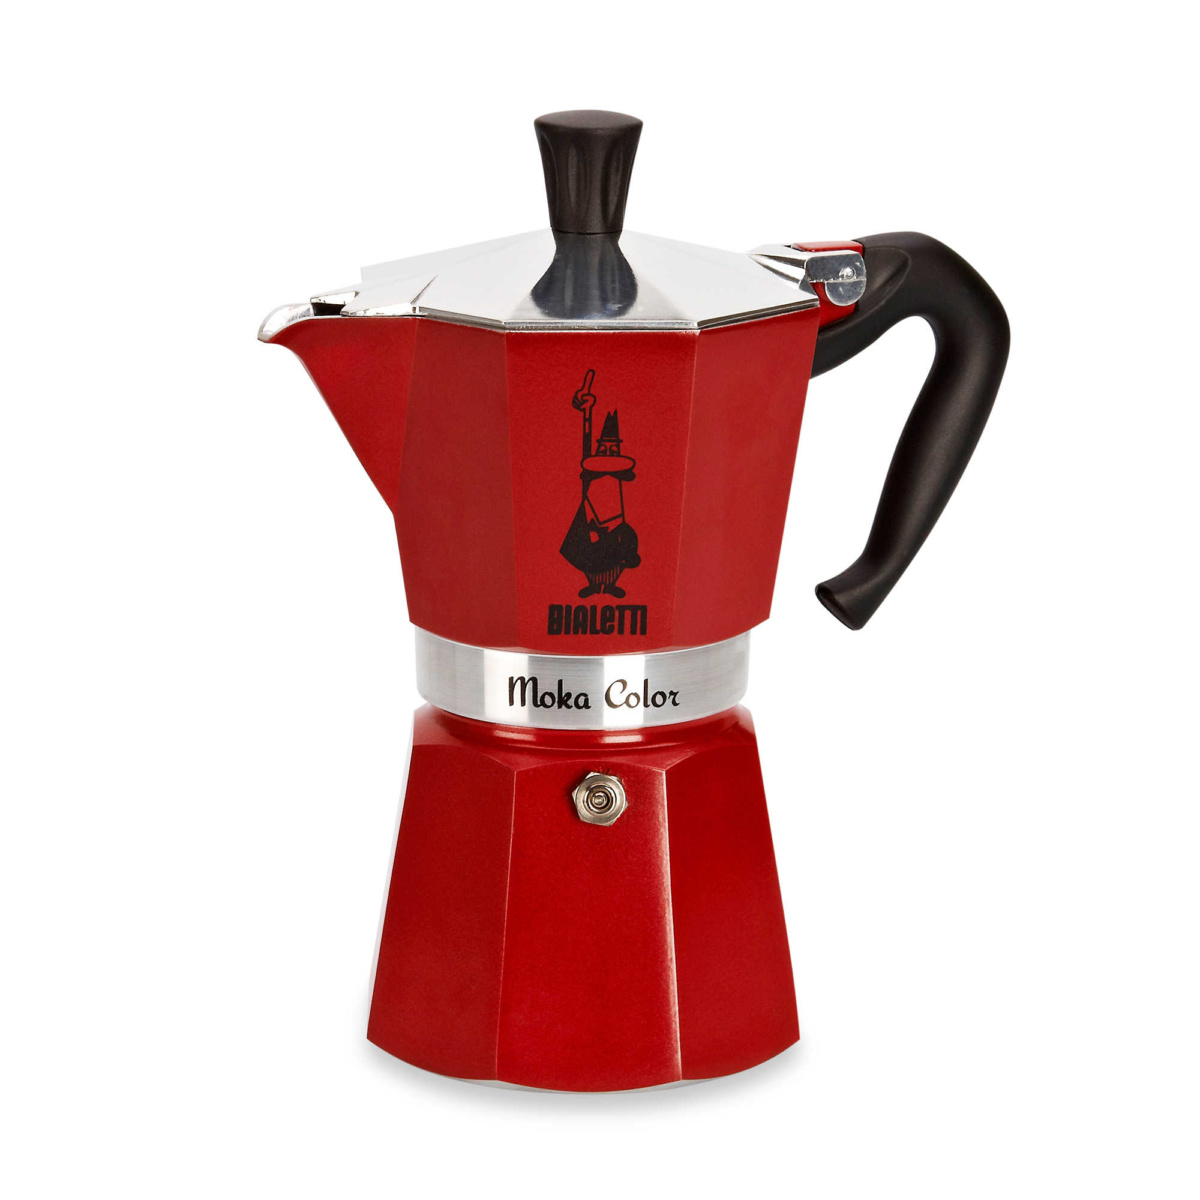 Gift ideas for coffee lovers: Bialetti Moka pot. Details at une femme d'un certain age.